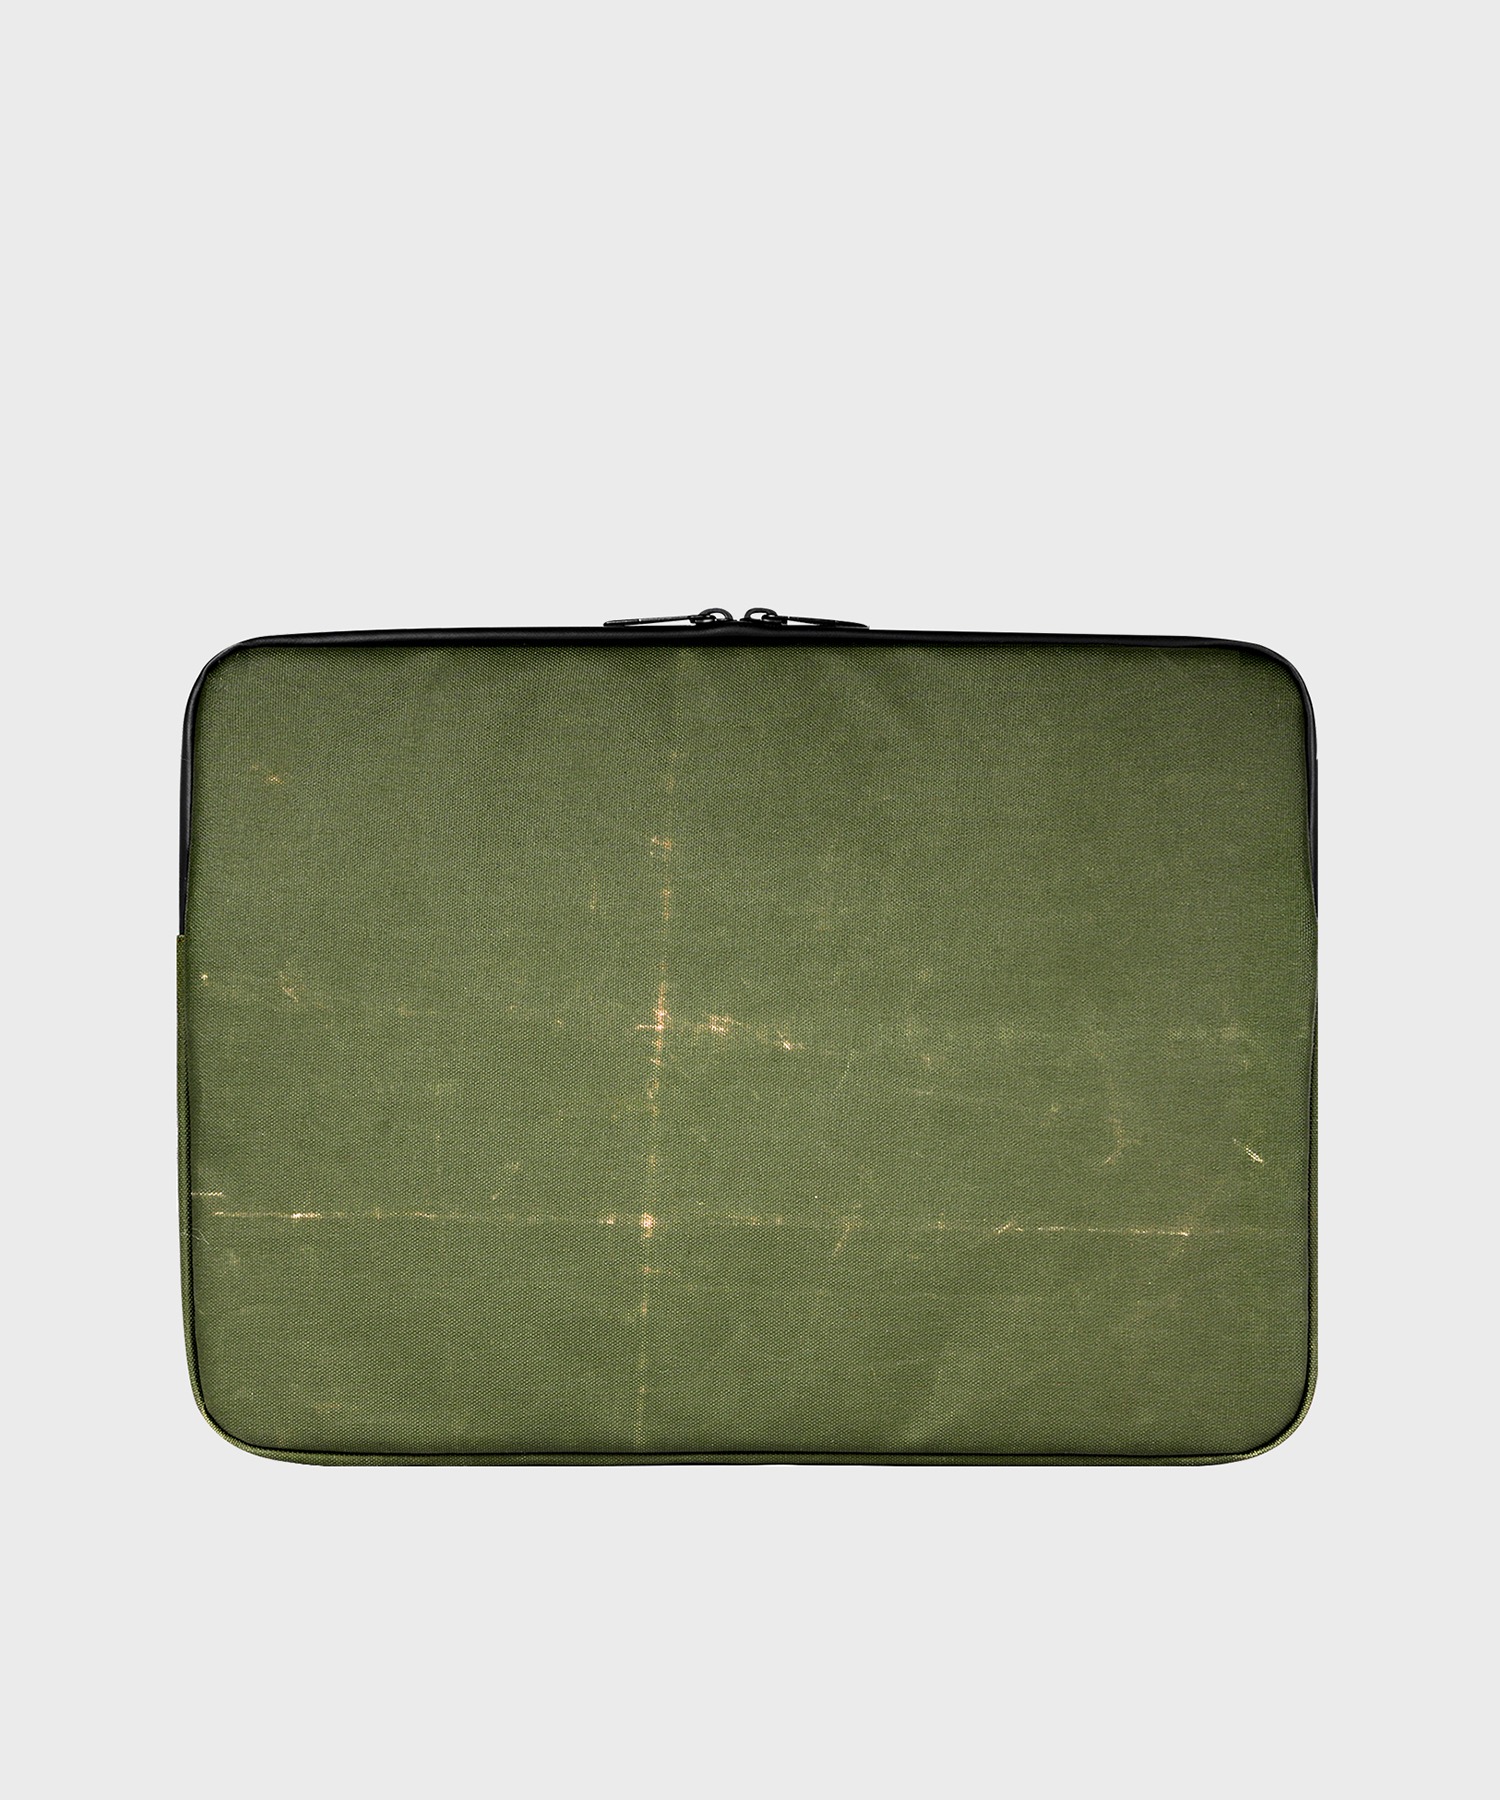 MUSEUM LAPTOP POUCH (OLIVE DRAB) / UPCYCLED